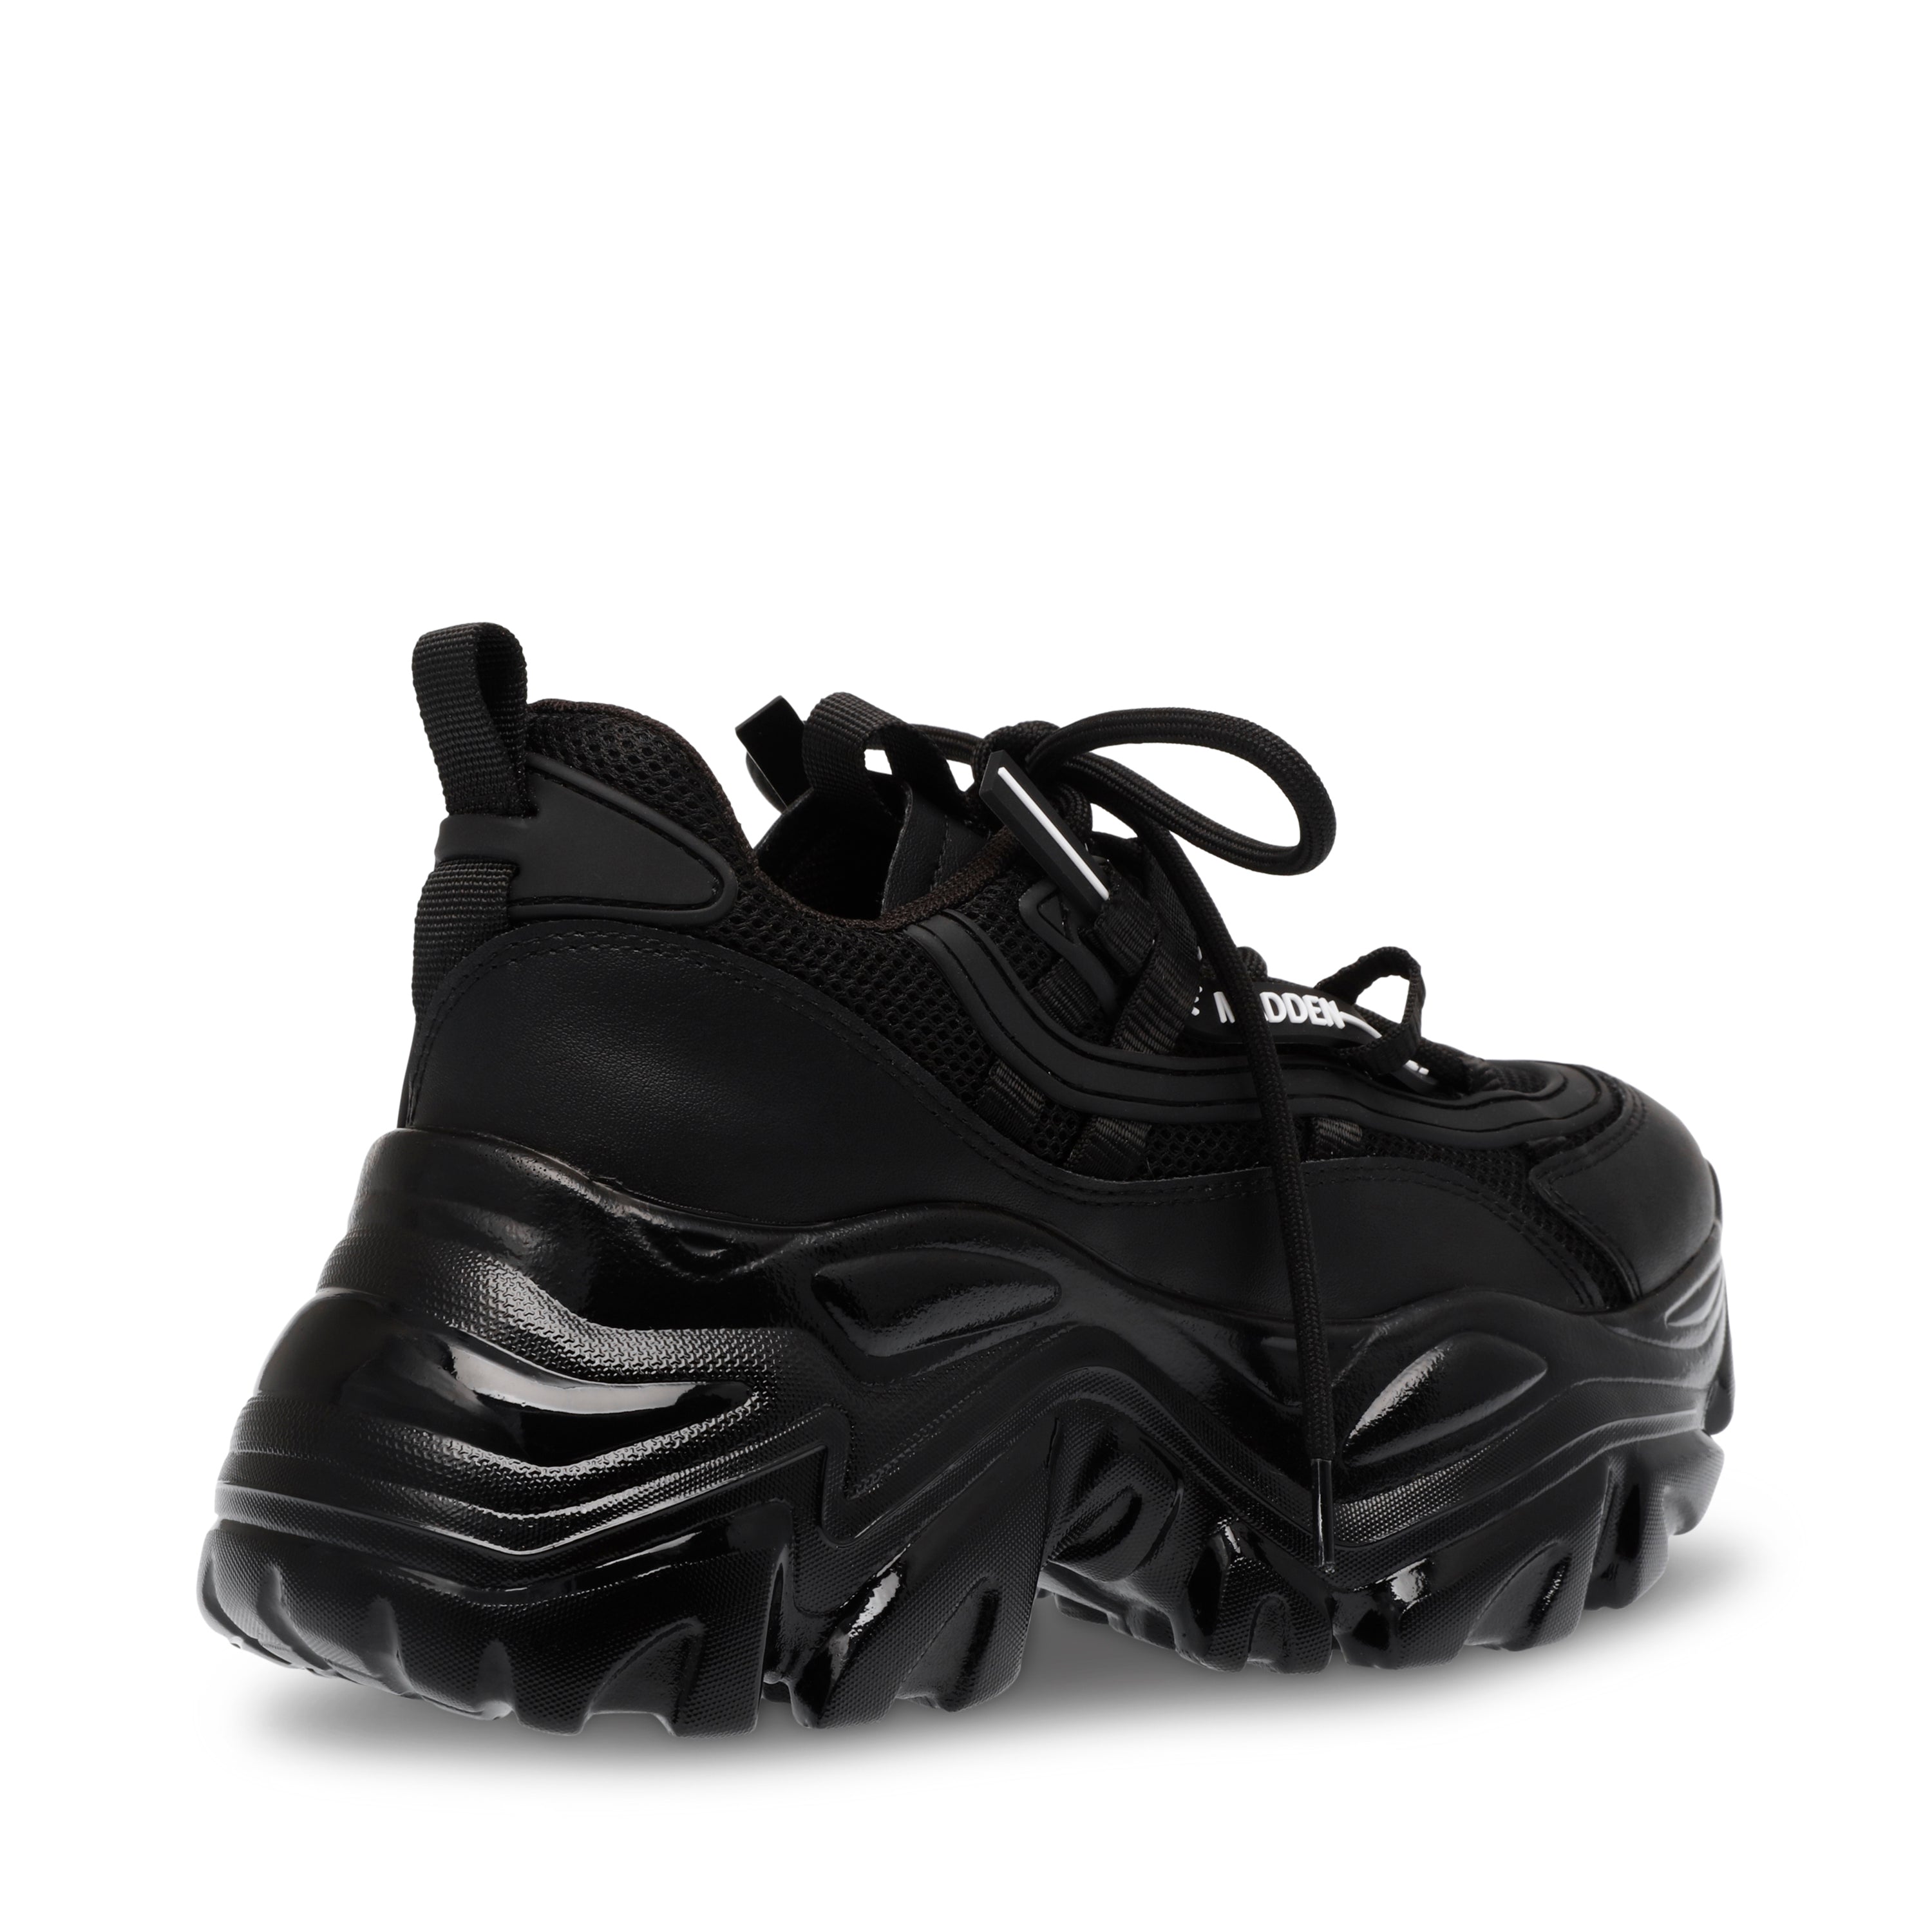 RECOUPE BLACK/BLACK SNEAKERS- Hover Image